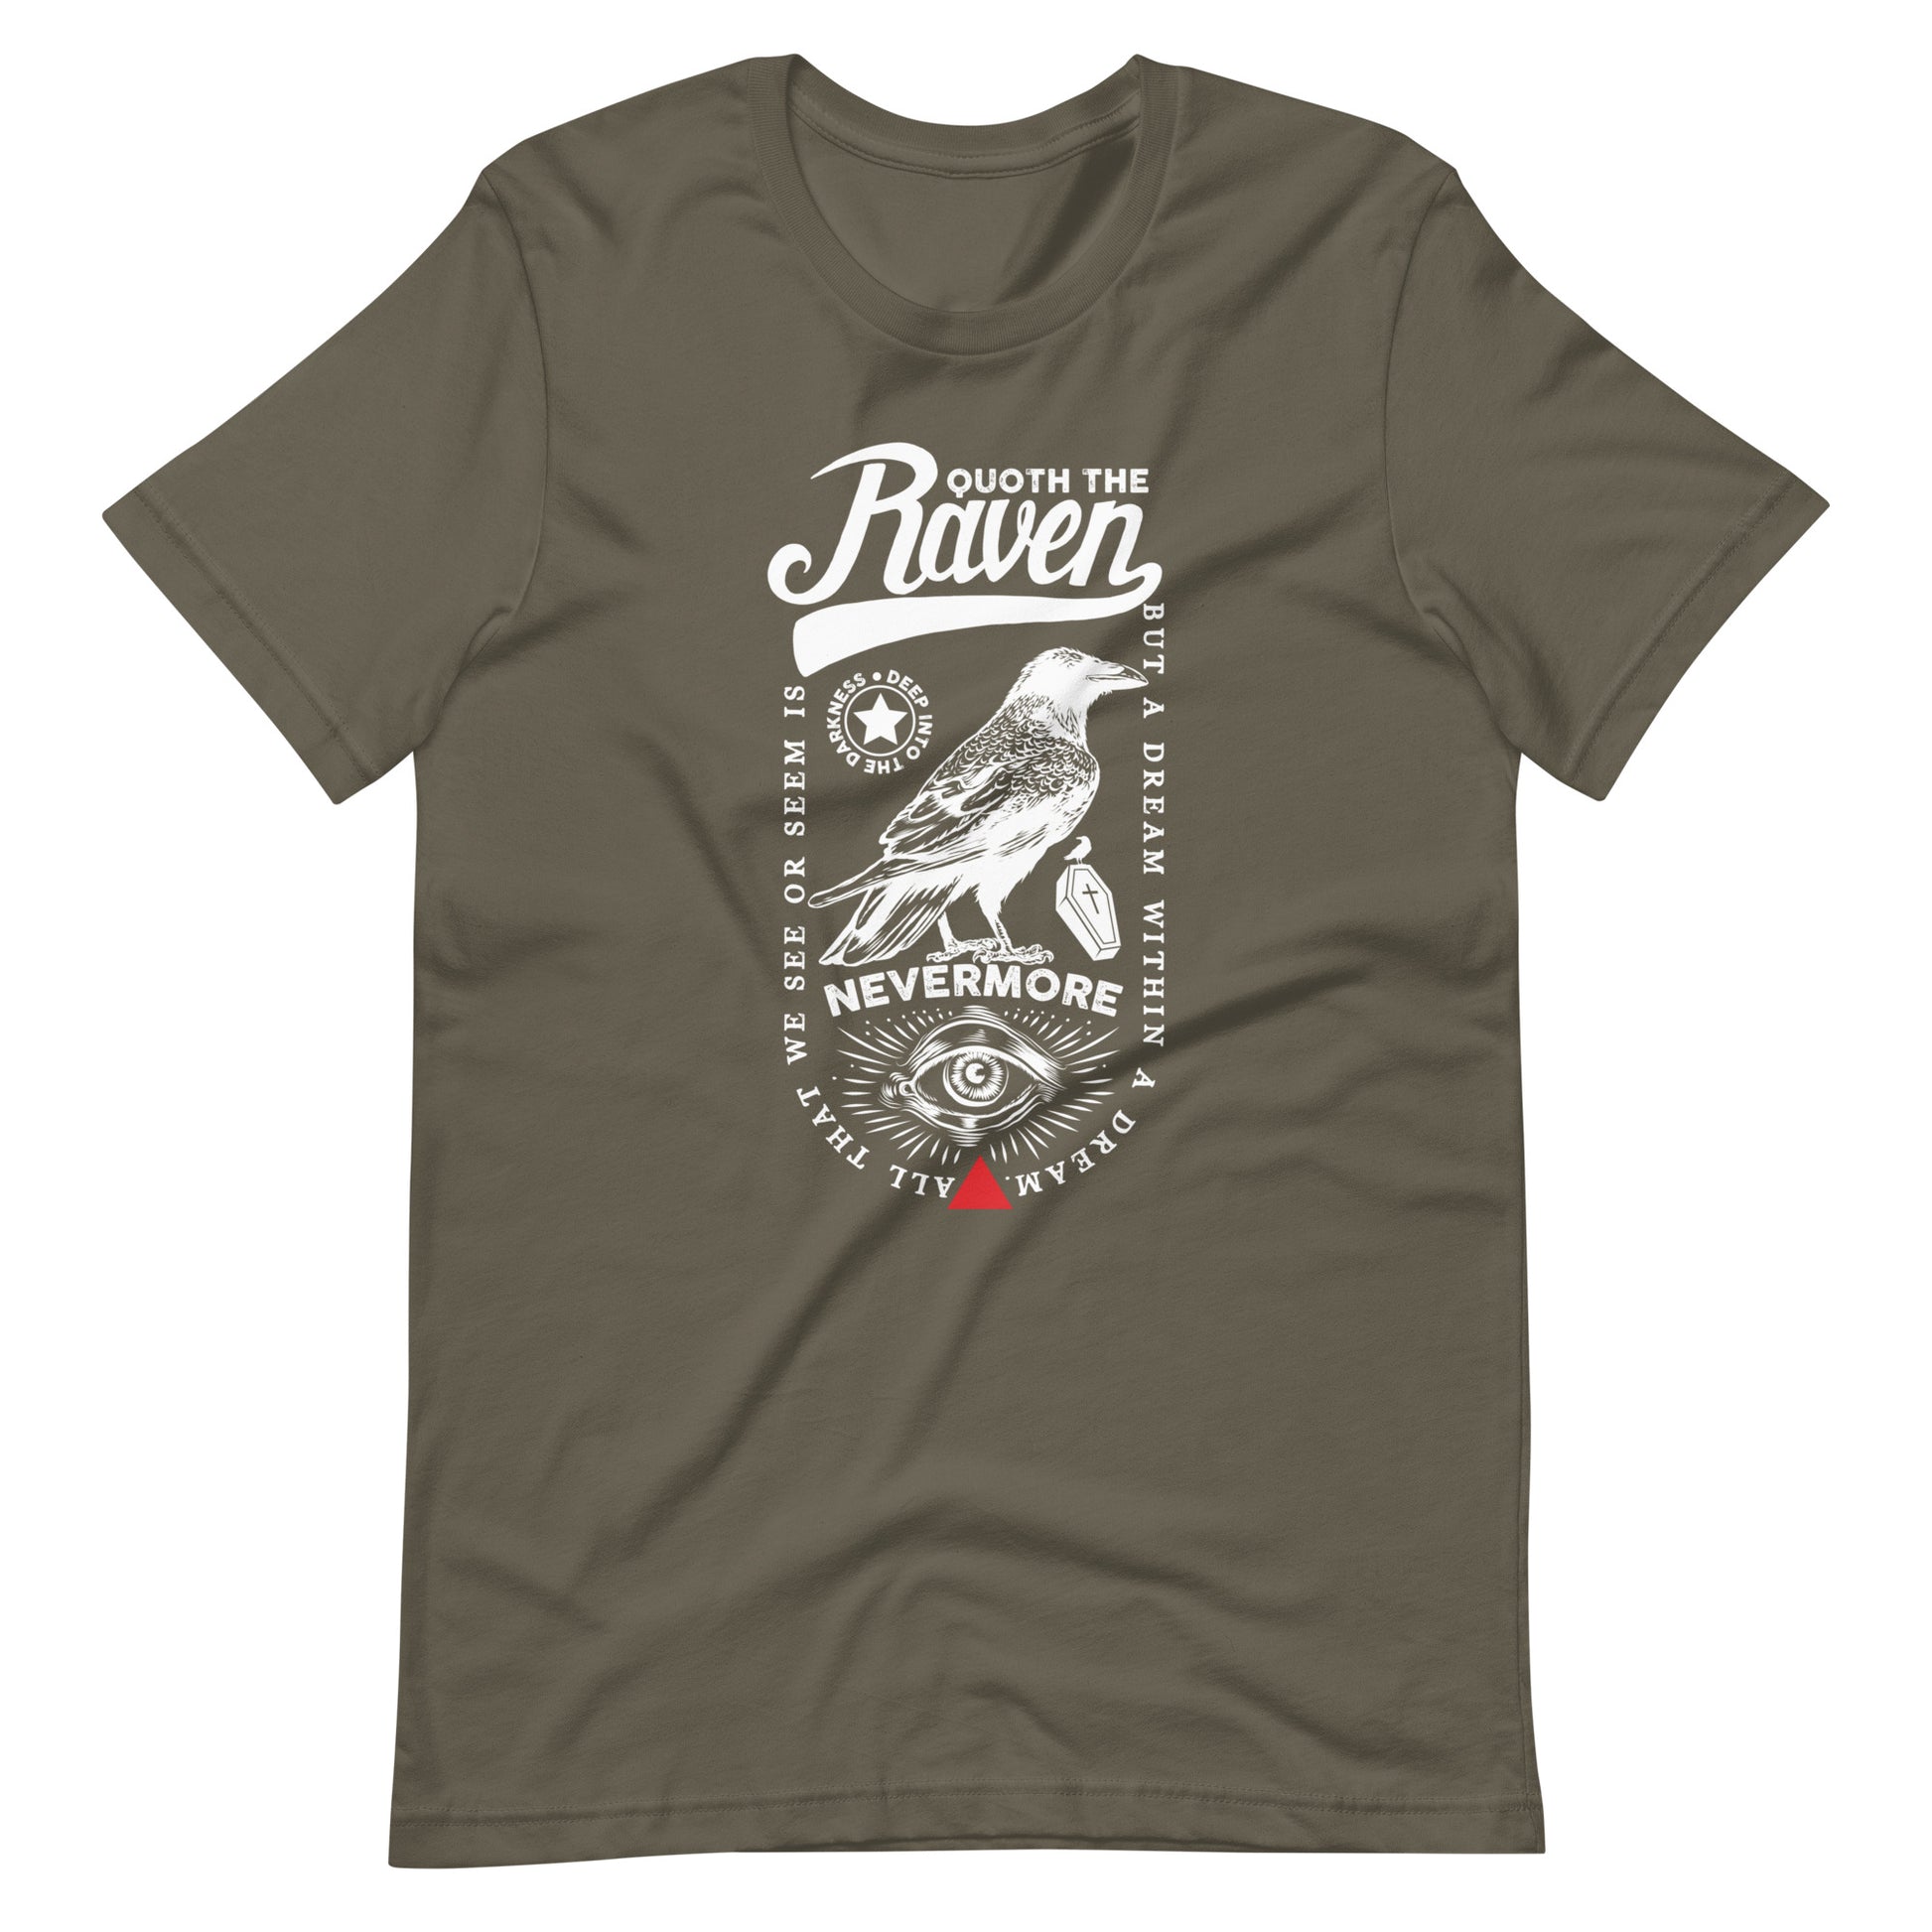 Quoth the Raven Nevermore Loaded - Men's t-shirt - Army Front